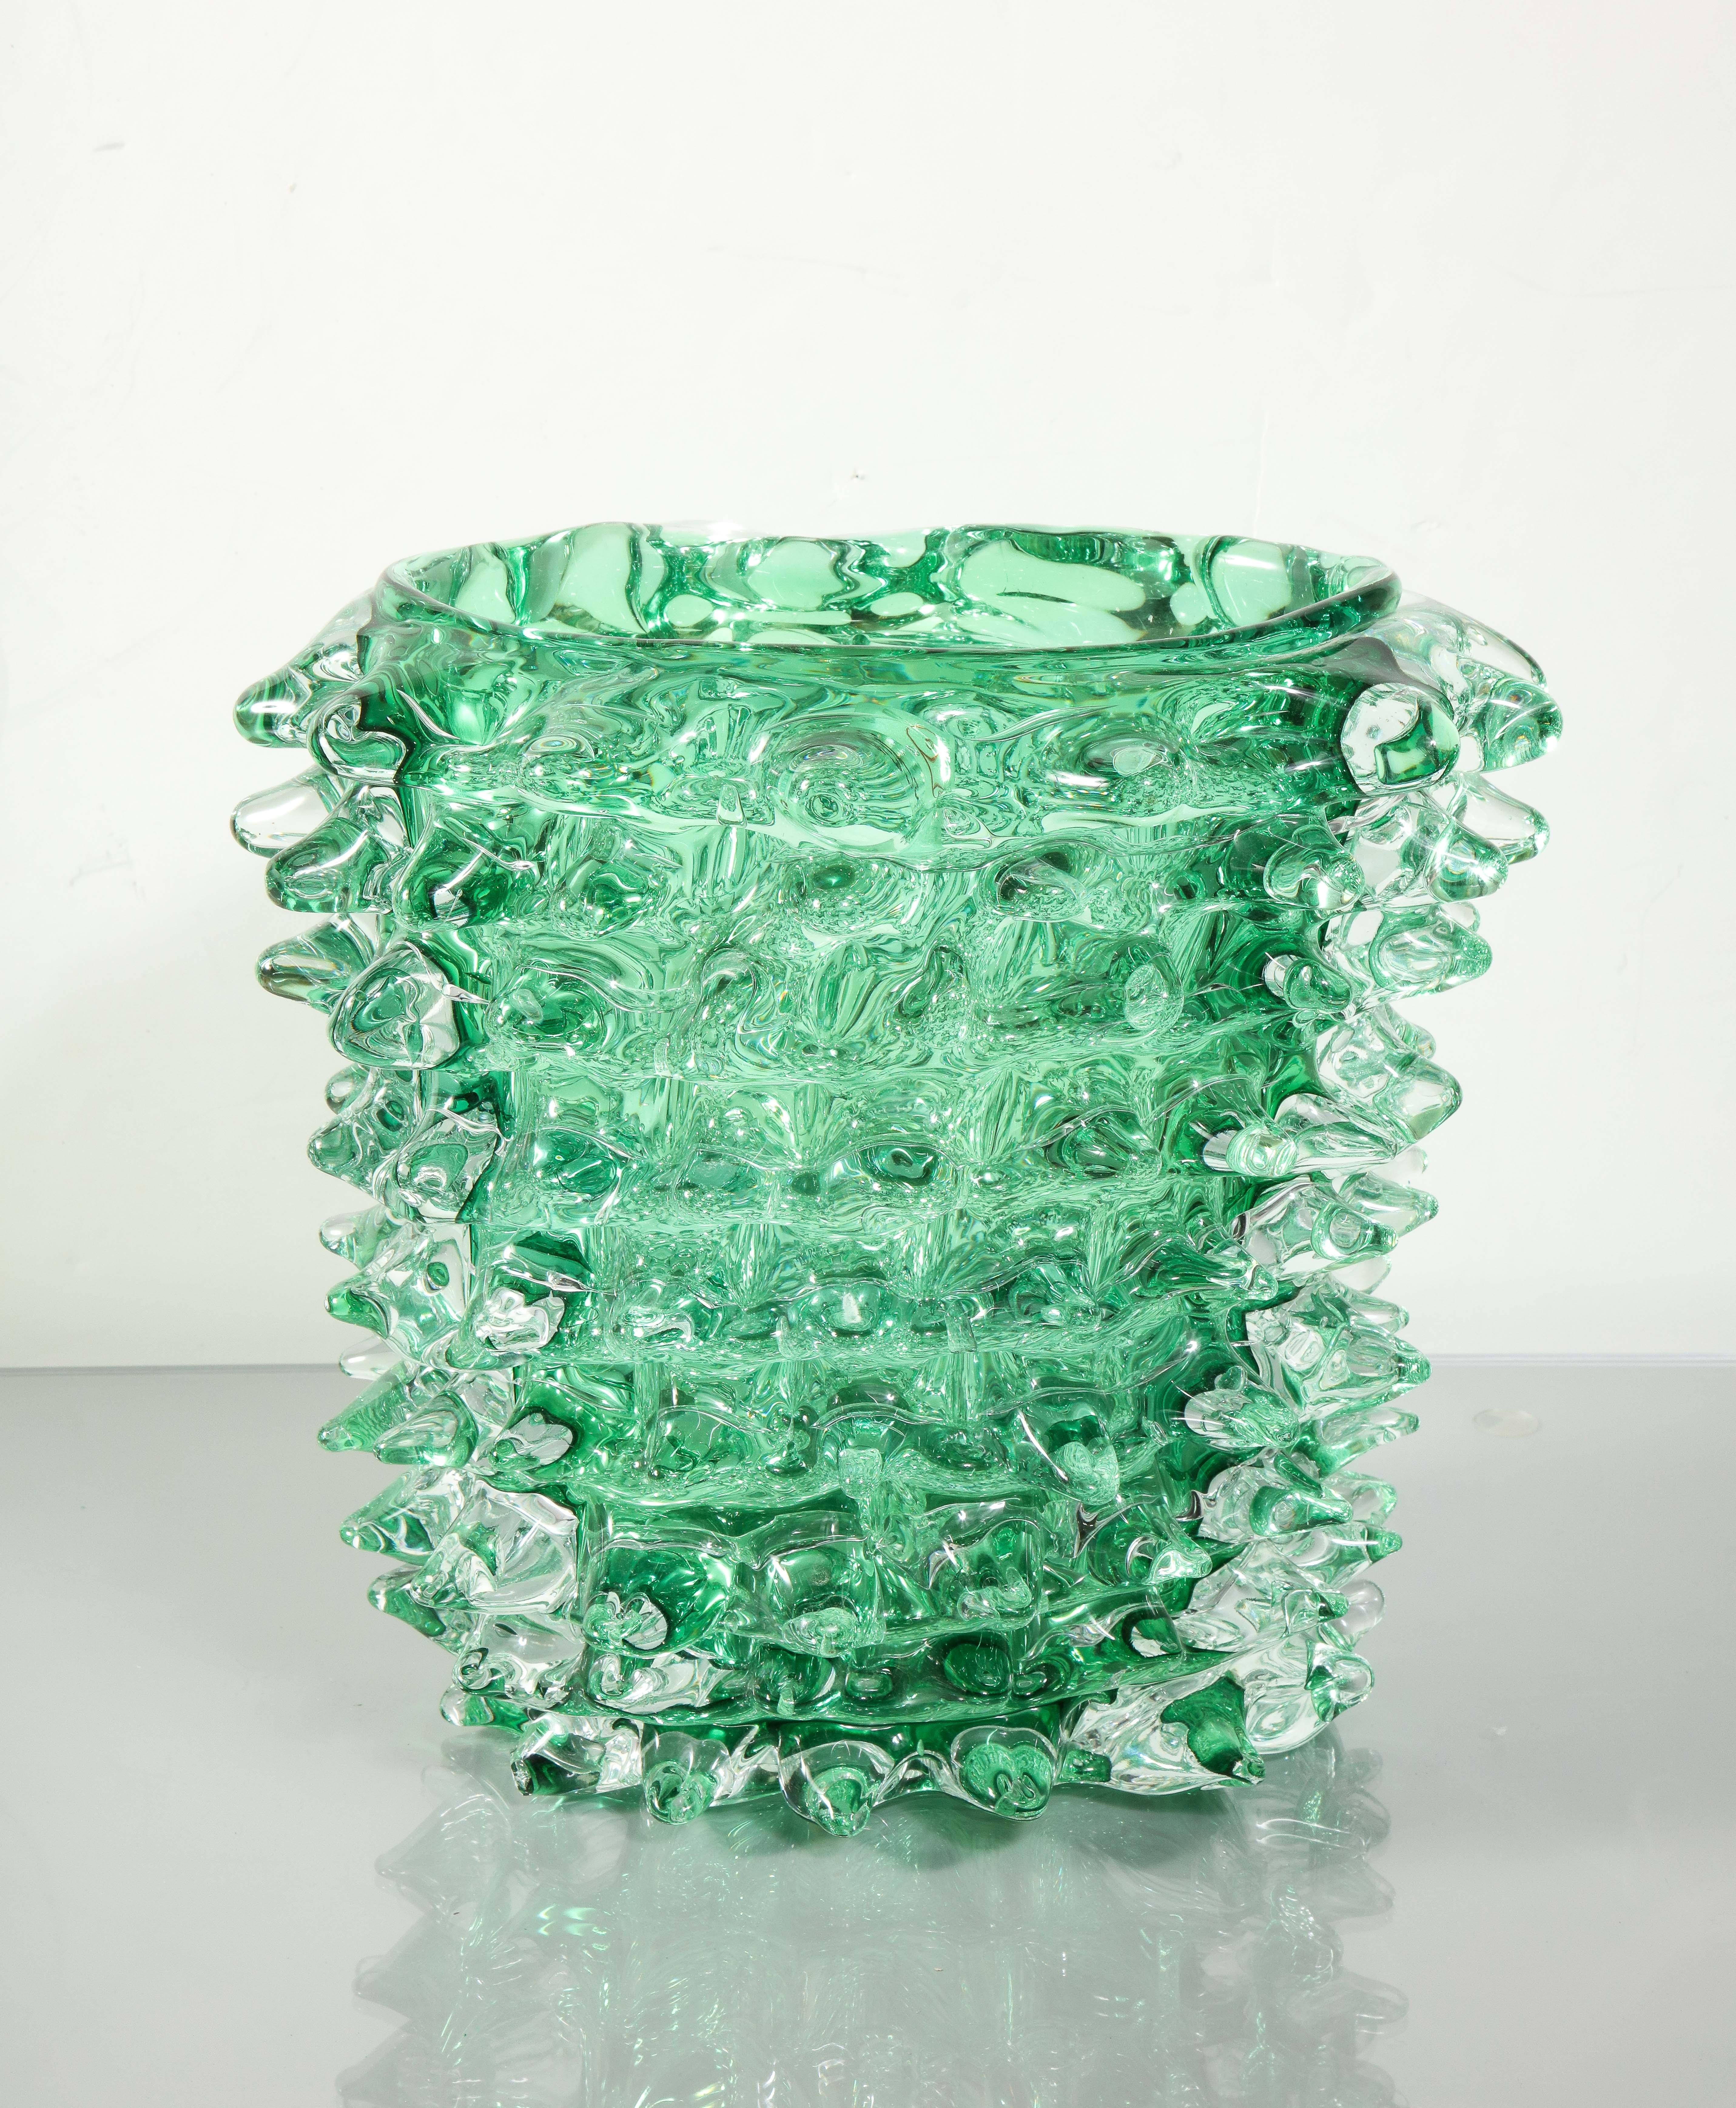 hand blown, midcentury style, green glass vase with spike design in the manner of Barovier, Italy.